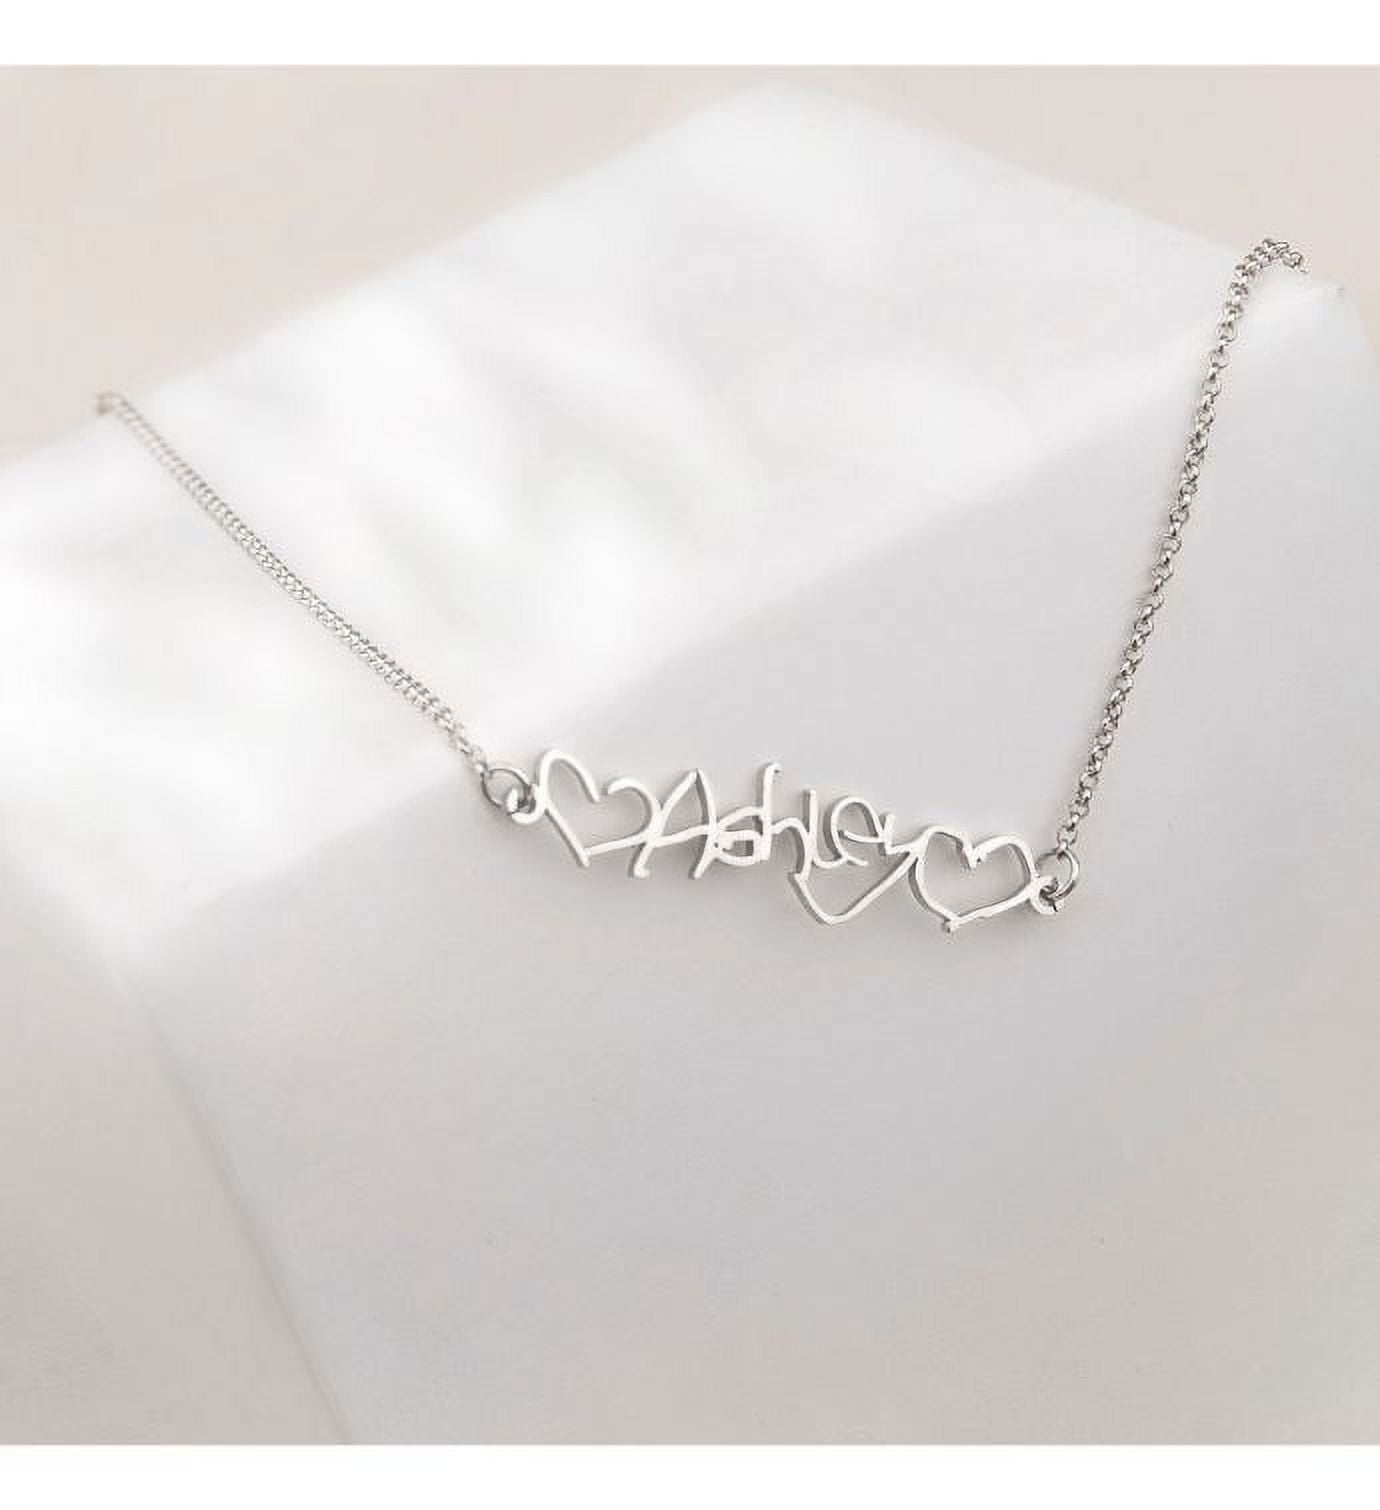 Buy Personalized Customized Women Teen 925 Sterling-Silver Handwriting  Signature Name Custom Necklace at Amazon.in